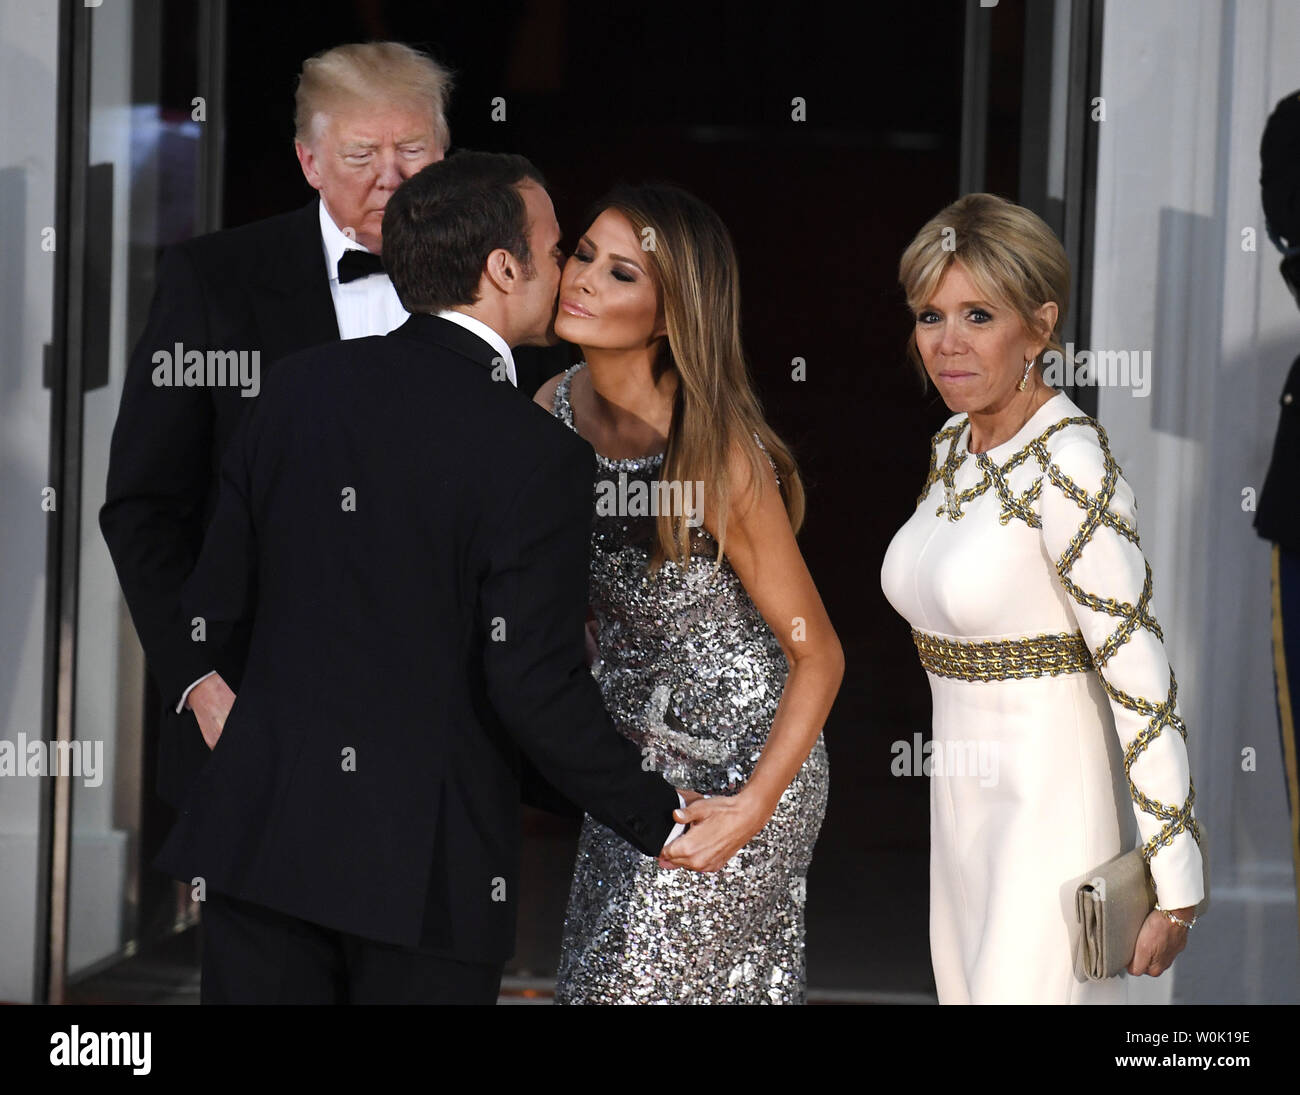 President Donald Trump (L) stands by as French President Emmanuel Macron  greets First Lady Melania Trump with a kiss as he and his wife Brigitte  arrive for a State Dinner at the